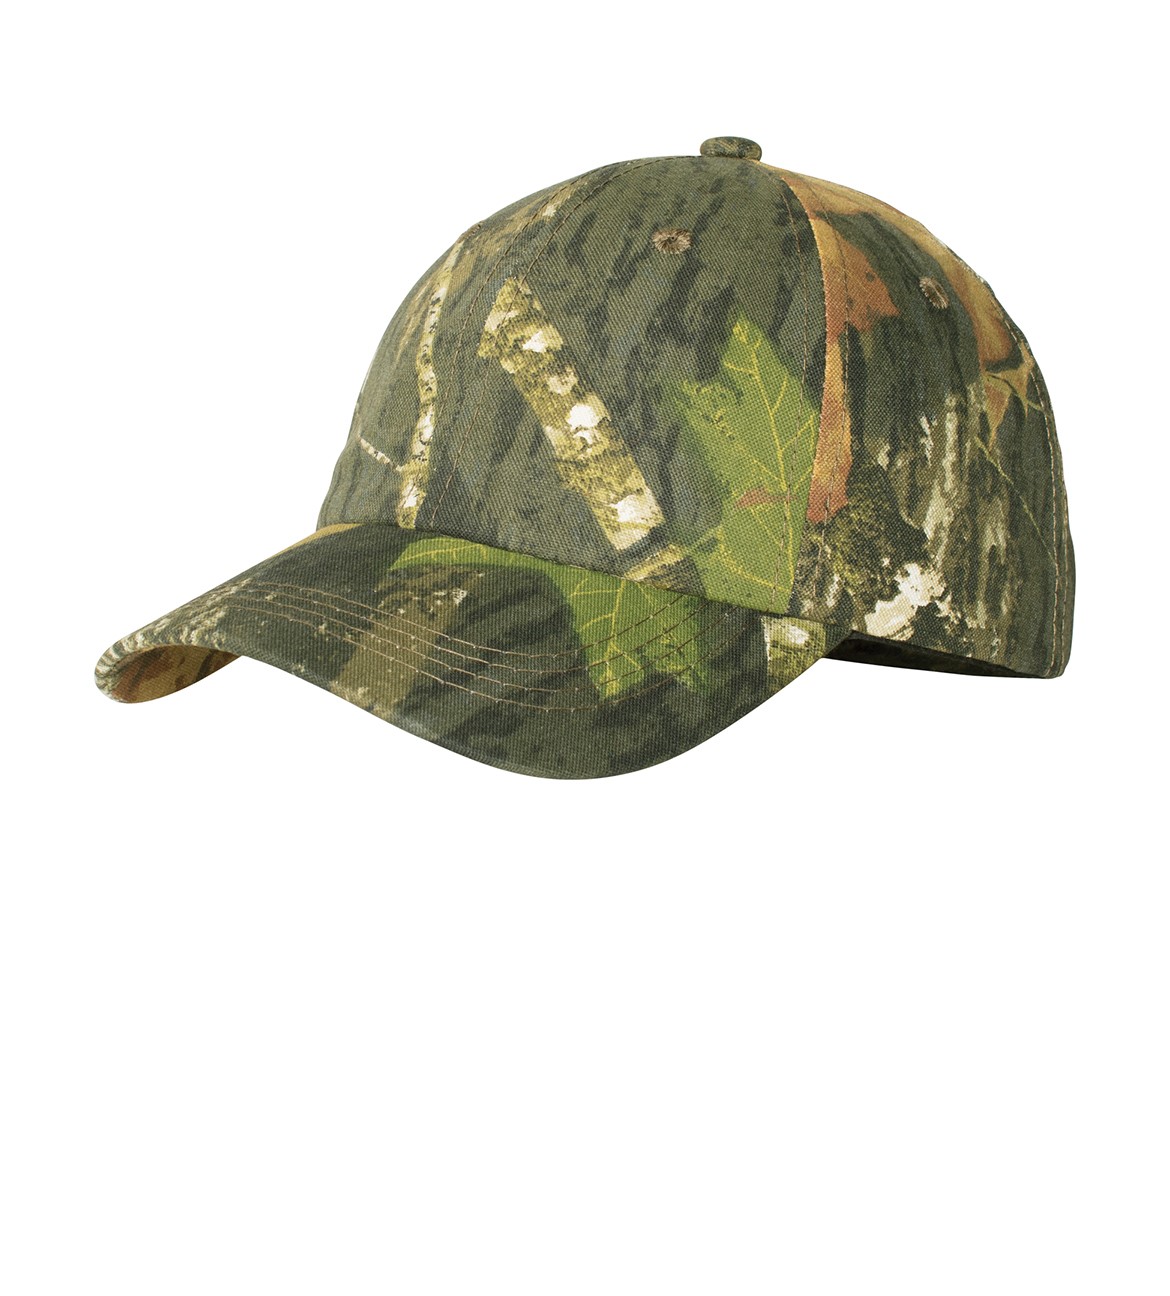 Port Authority® C871 Pro Camouflage Series Garment-Washed Cap